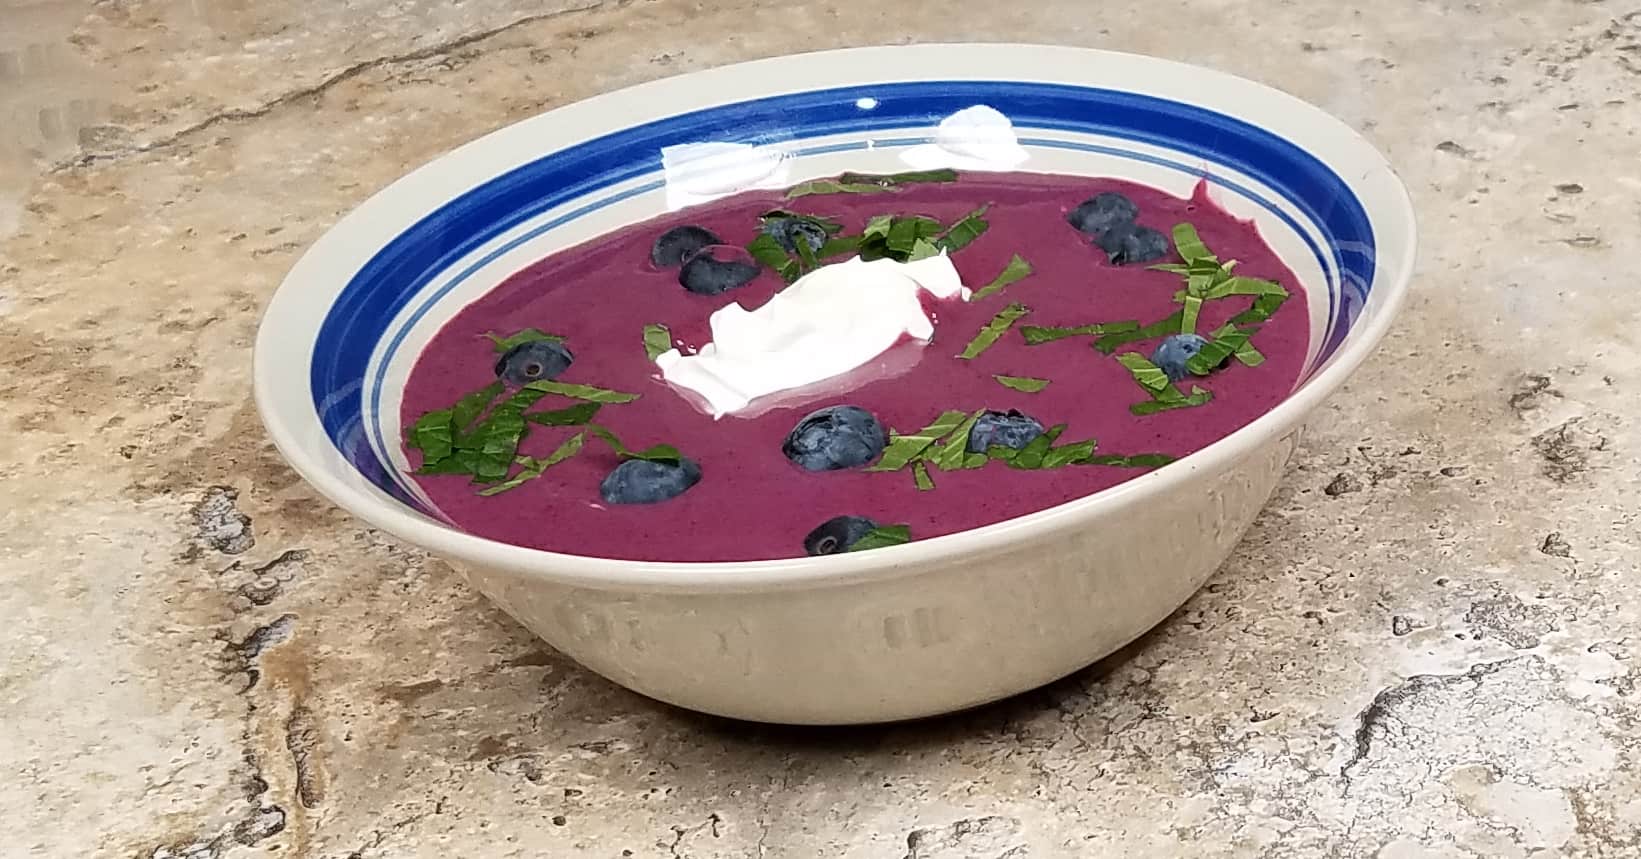 Spiced Blueberry Soup in a bowl